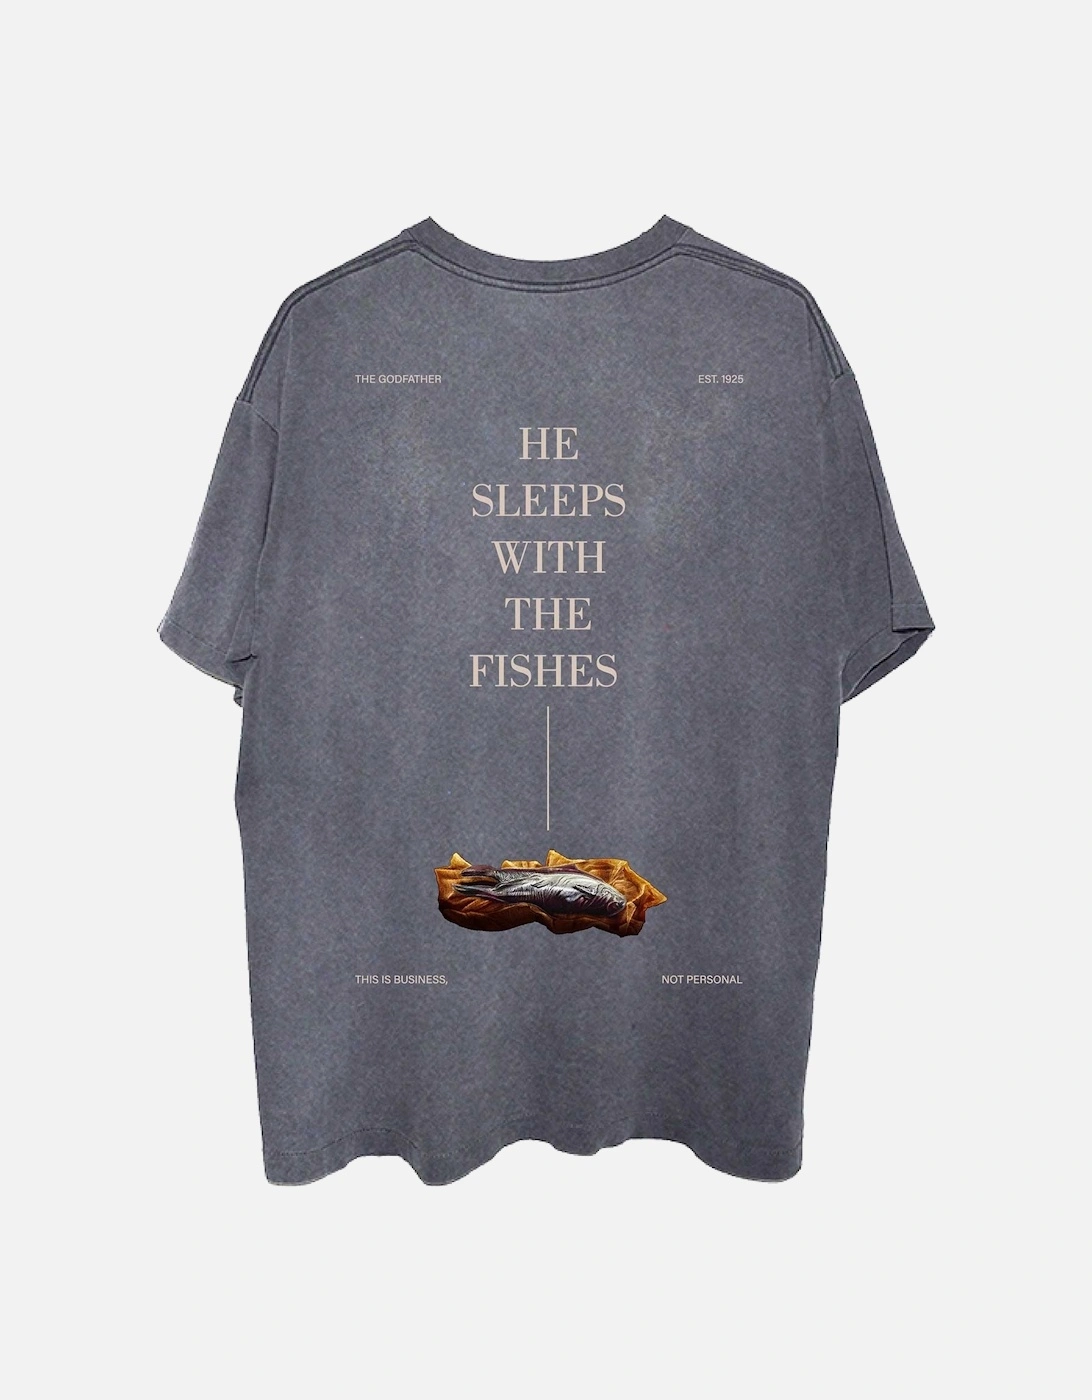 Unisex Adult Sleeps With The Fishes Back Print Cotton T-Shirt